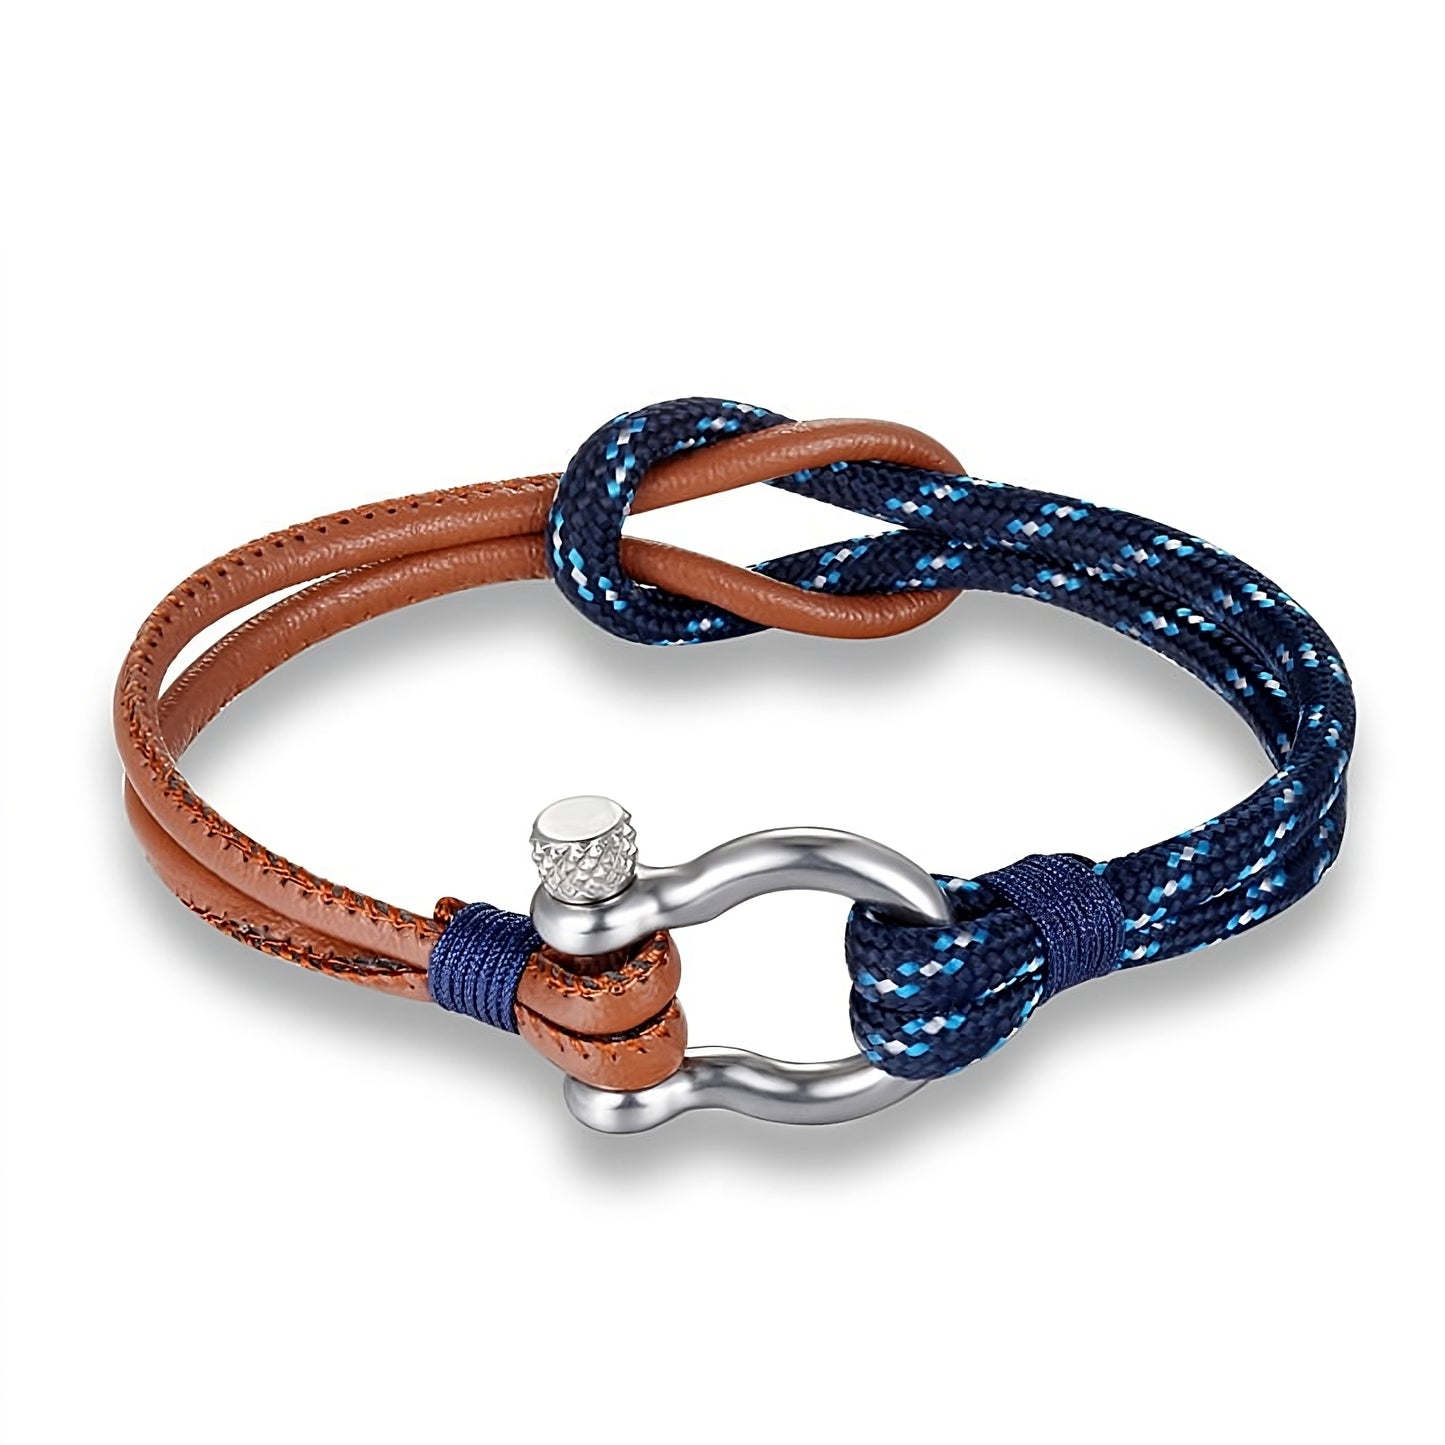 Stylish and Practical: The Survival Bracelet - VHD